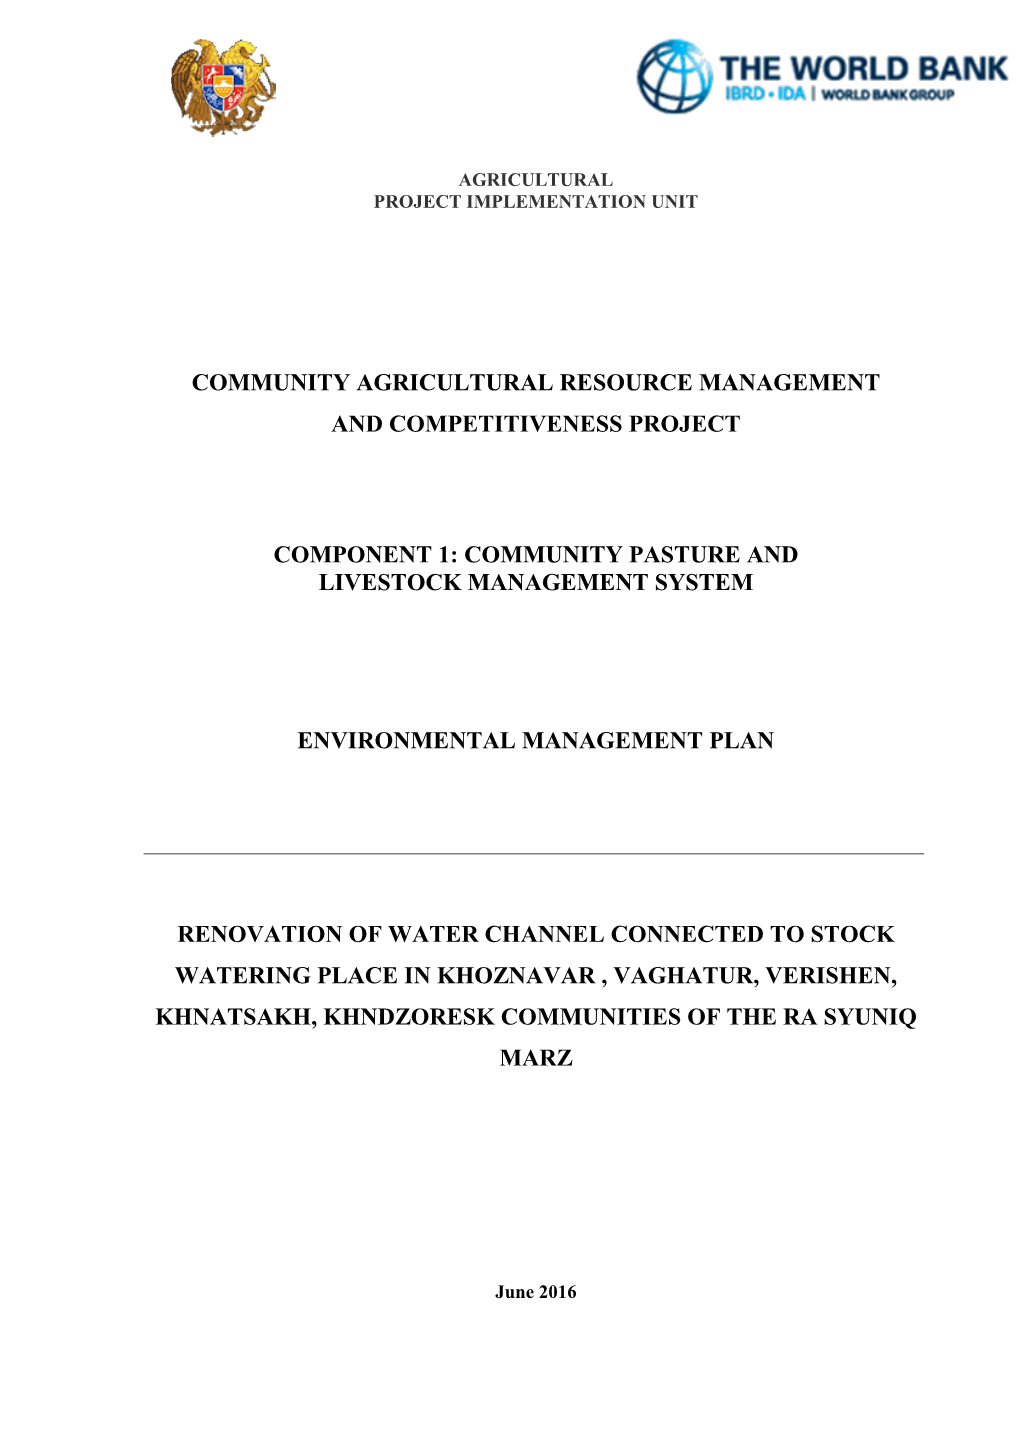 Community Agricultural Resource Management and Competitiveness Project